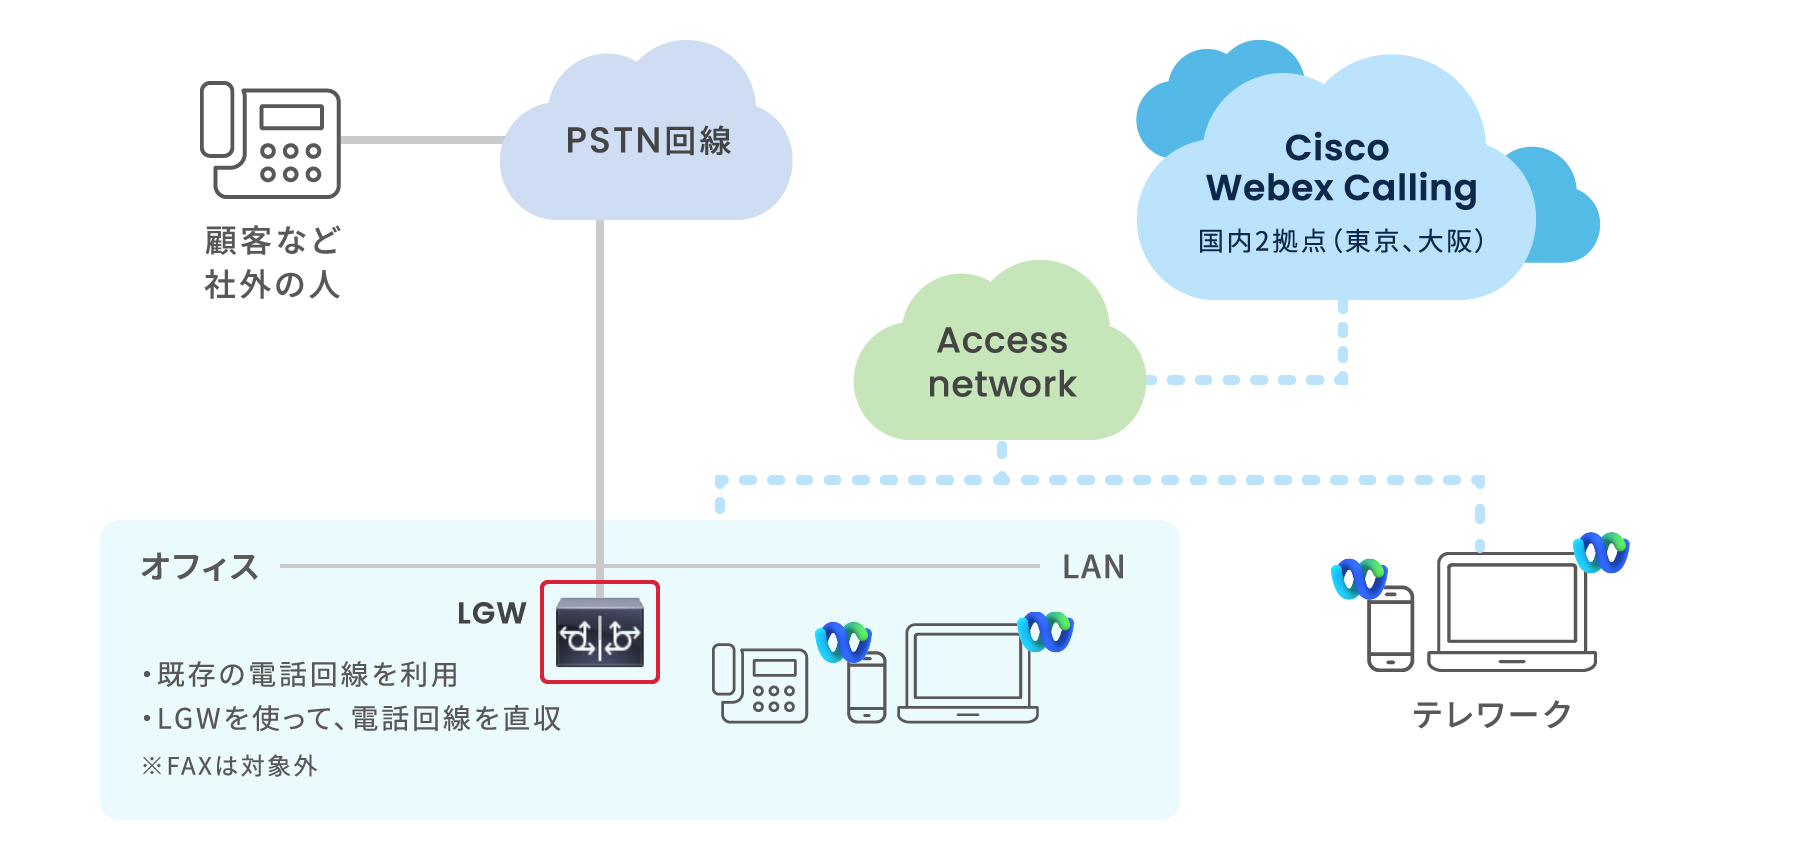 Webex Calling by Cisco。全国幅広く提供可能、一般的な構成例　※Cloud Connected PSTNサービス未提供のエリアの拠点の場合